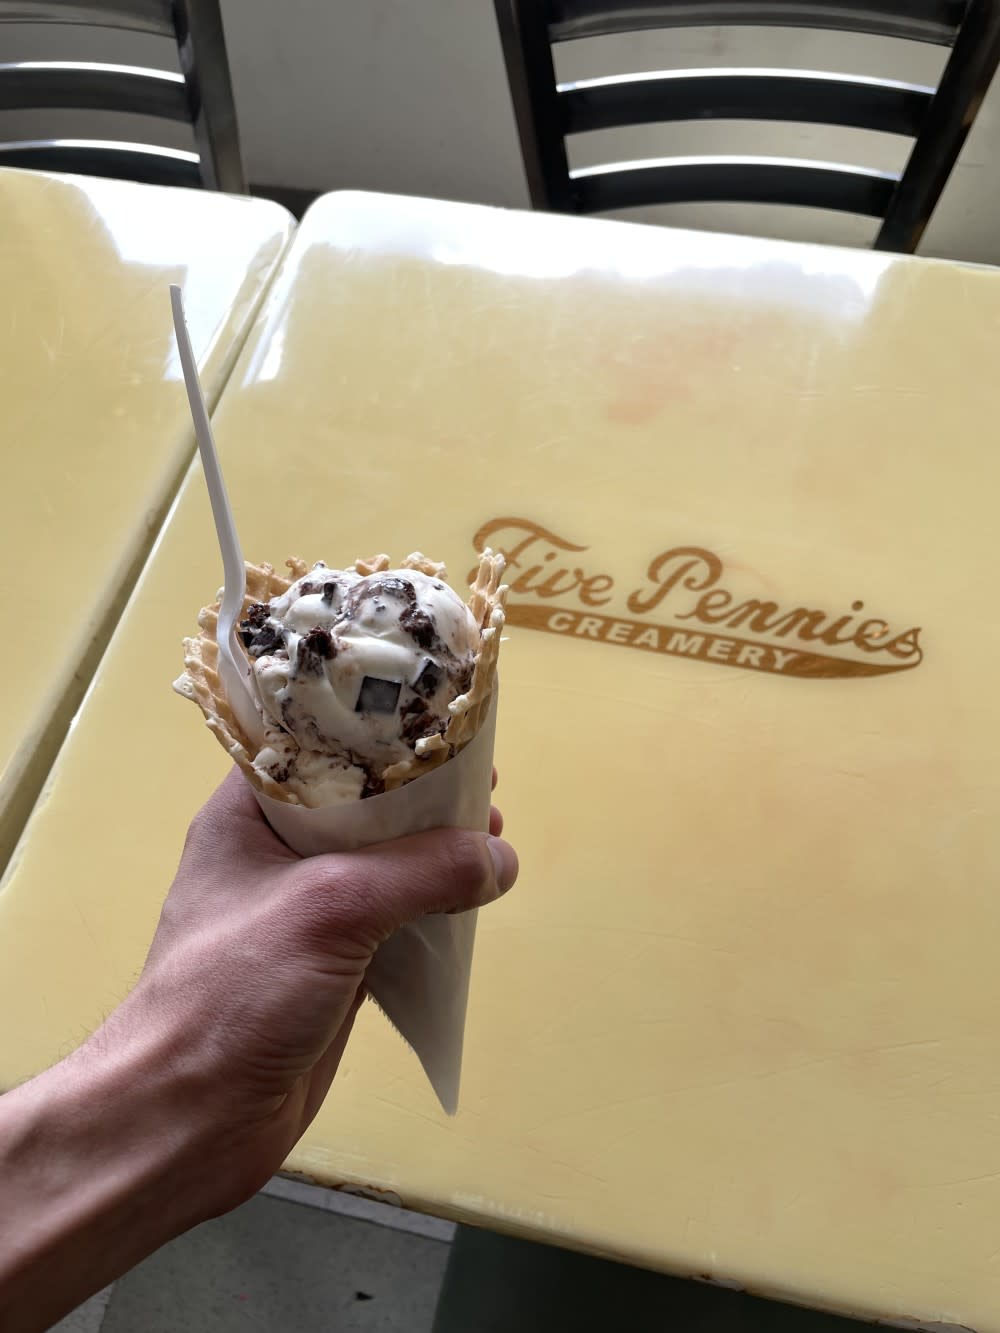 A cone filled to the top with ice cream from Five Pennies in Rockville Centre